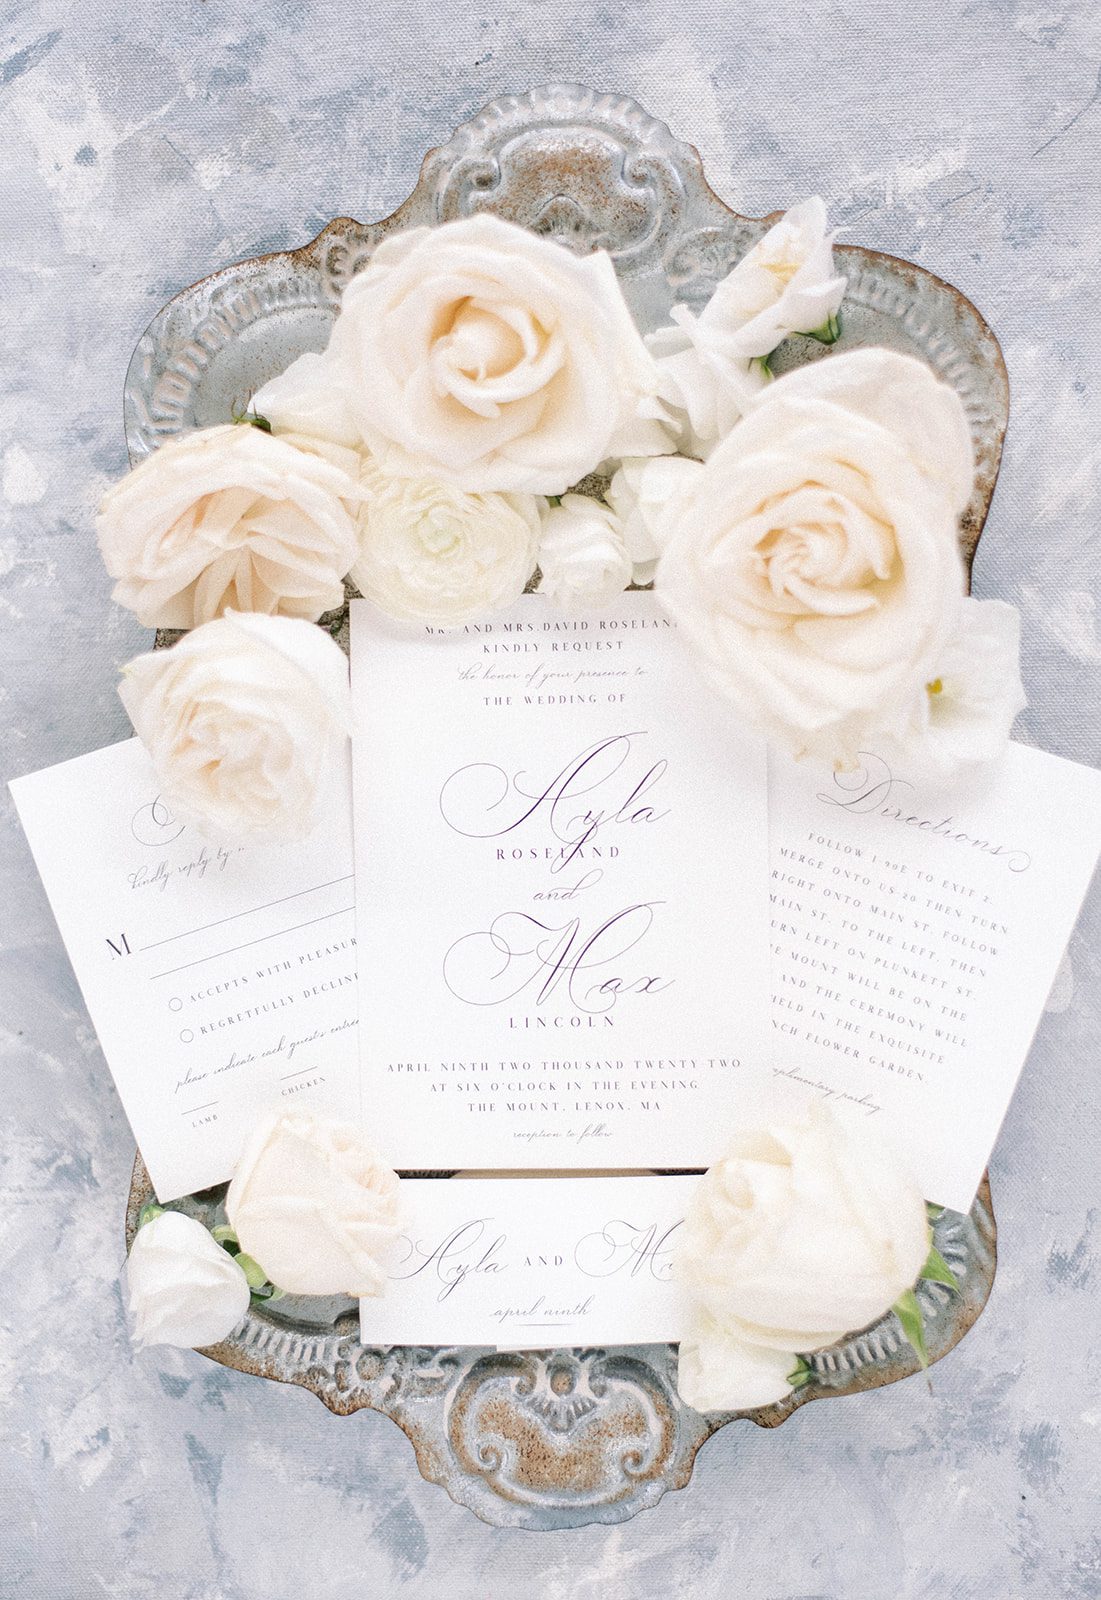 picture perfect wedding invitation on a silver platter with white roses detailing the wedding theme in the flatlay shot